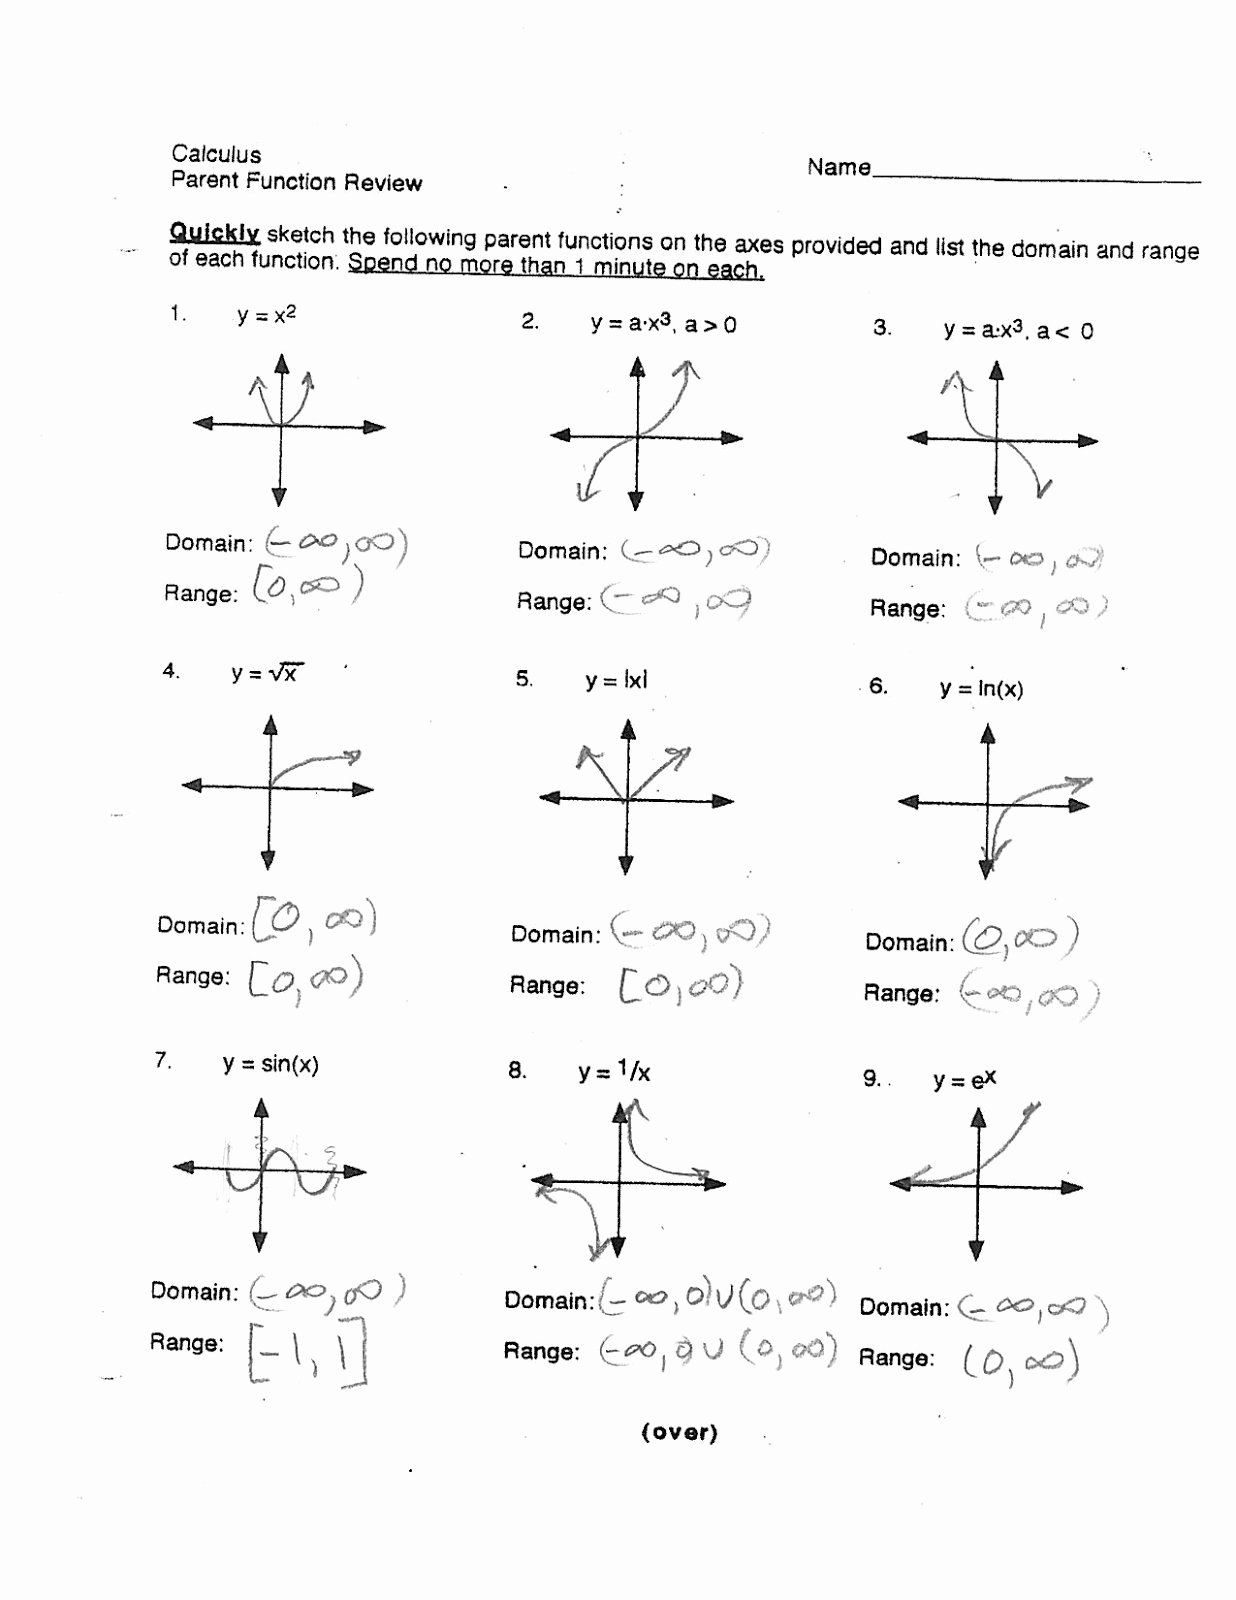 Parent Function Worksheet Answers Elegant Mr Suominen S Math Homepage Honors Calculus 9 5 13